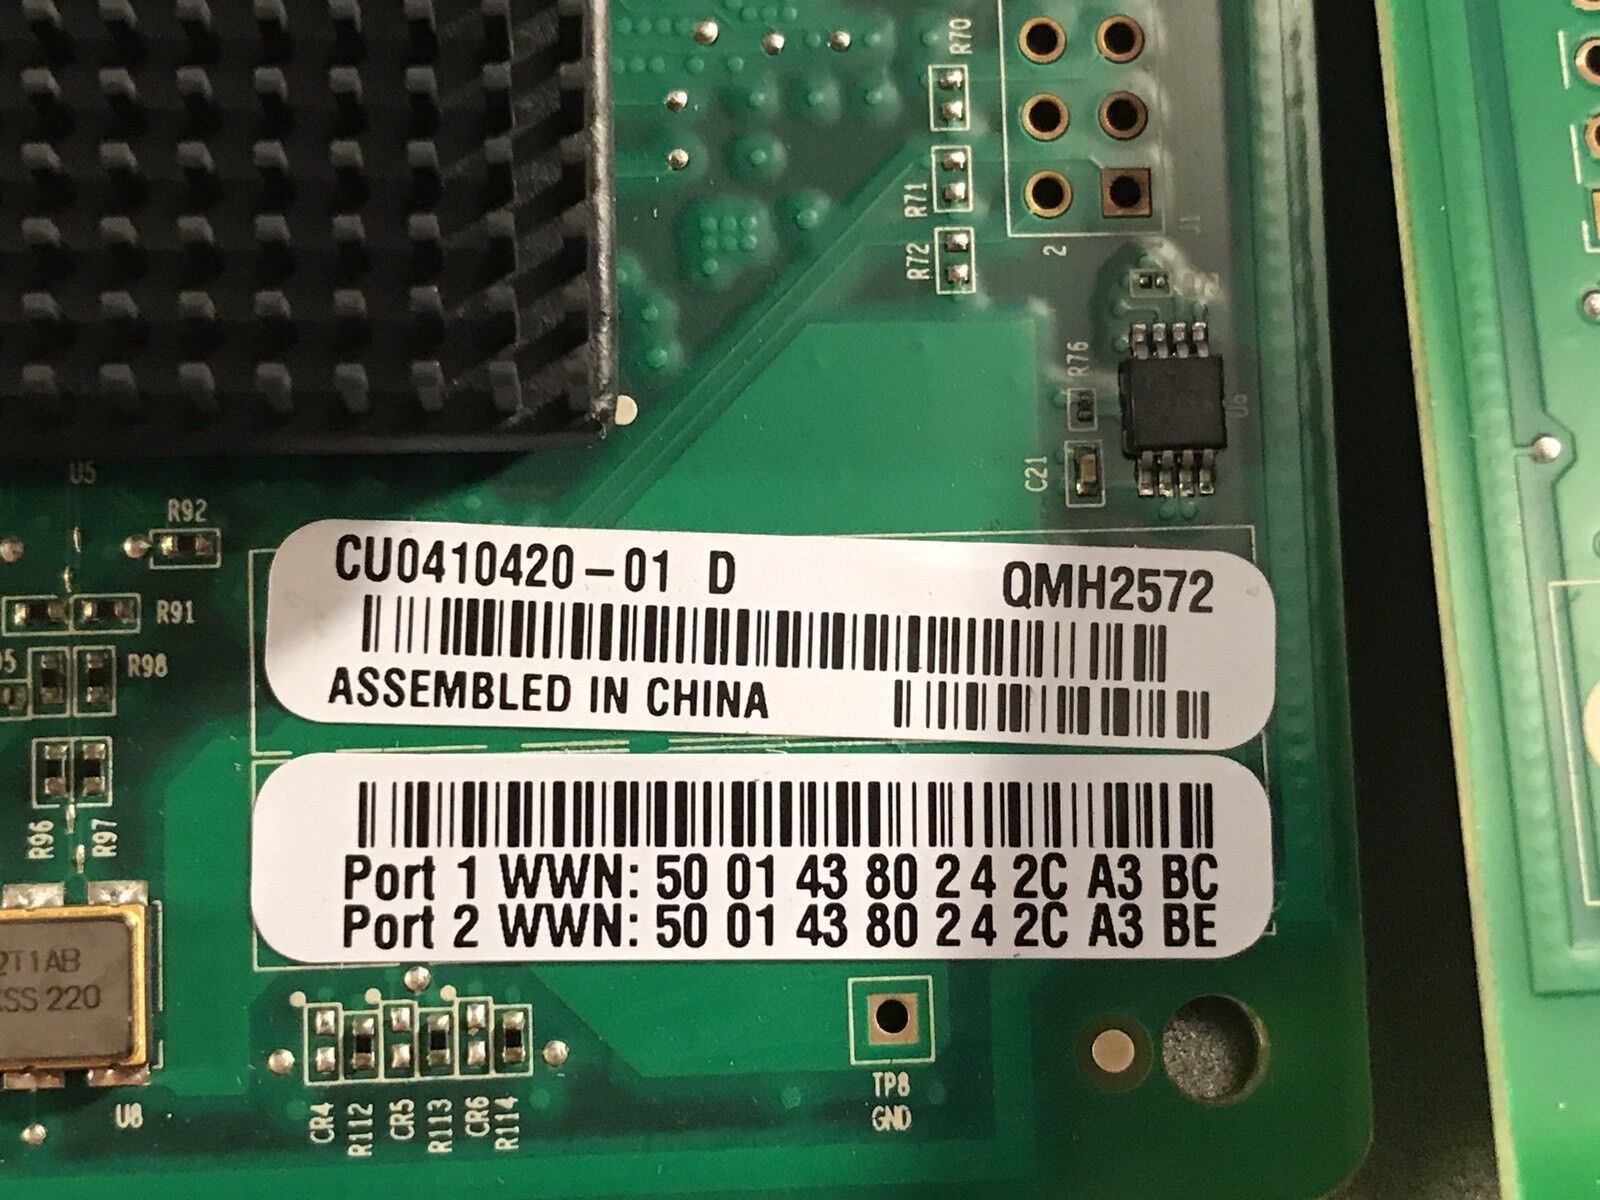 HP QMH2572 Updated with latest firmware 651281-B21 2 Port 8Gb FC Host Bus Adapter HBA.